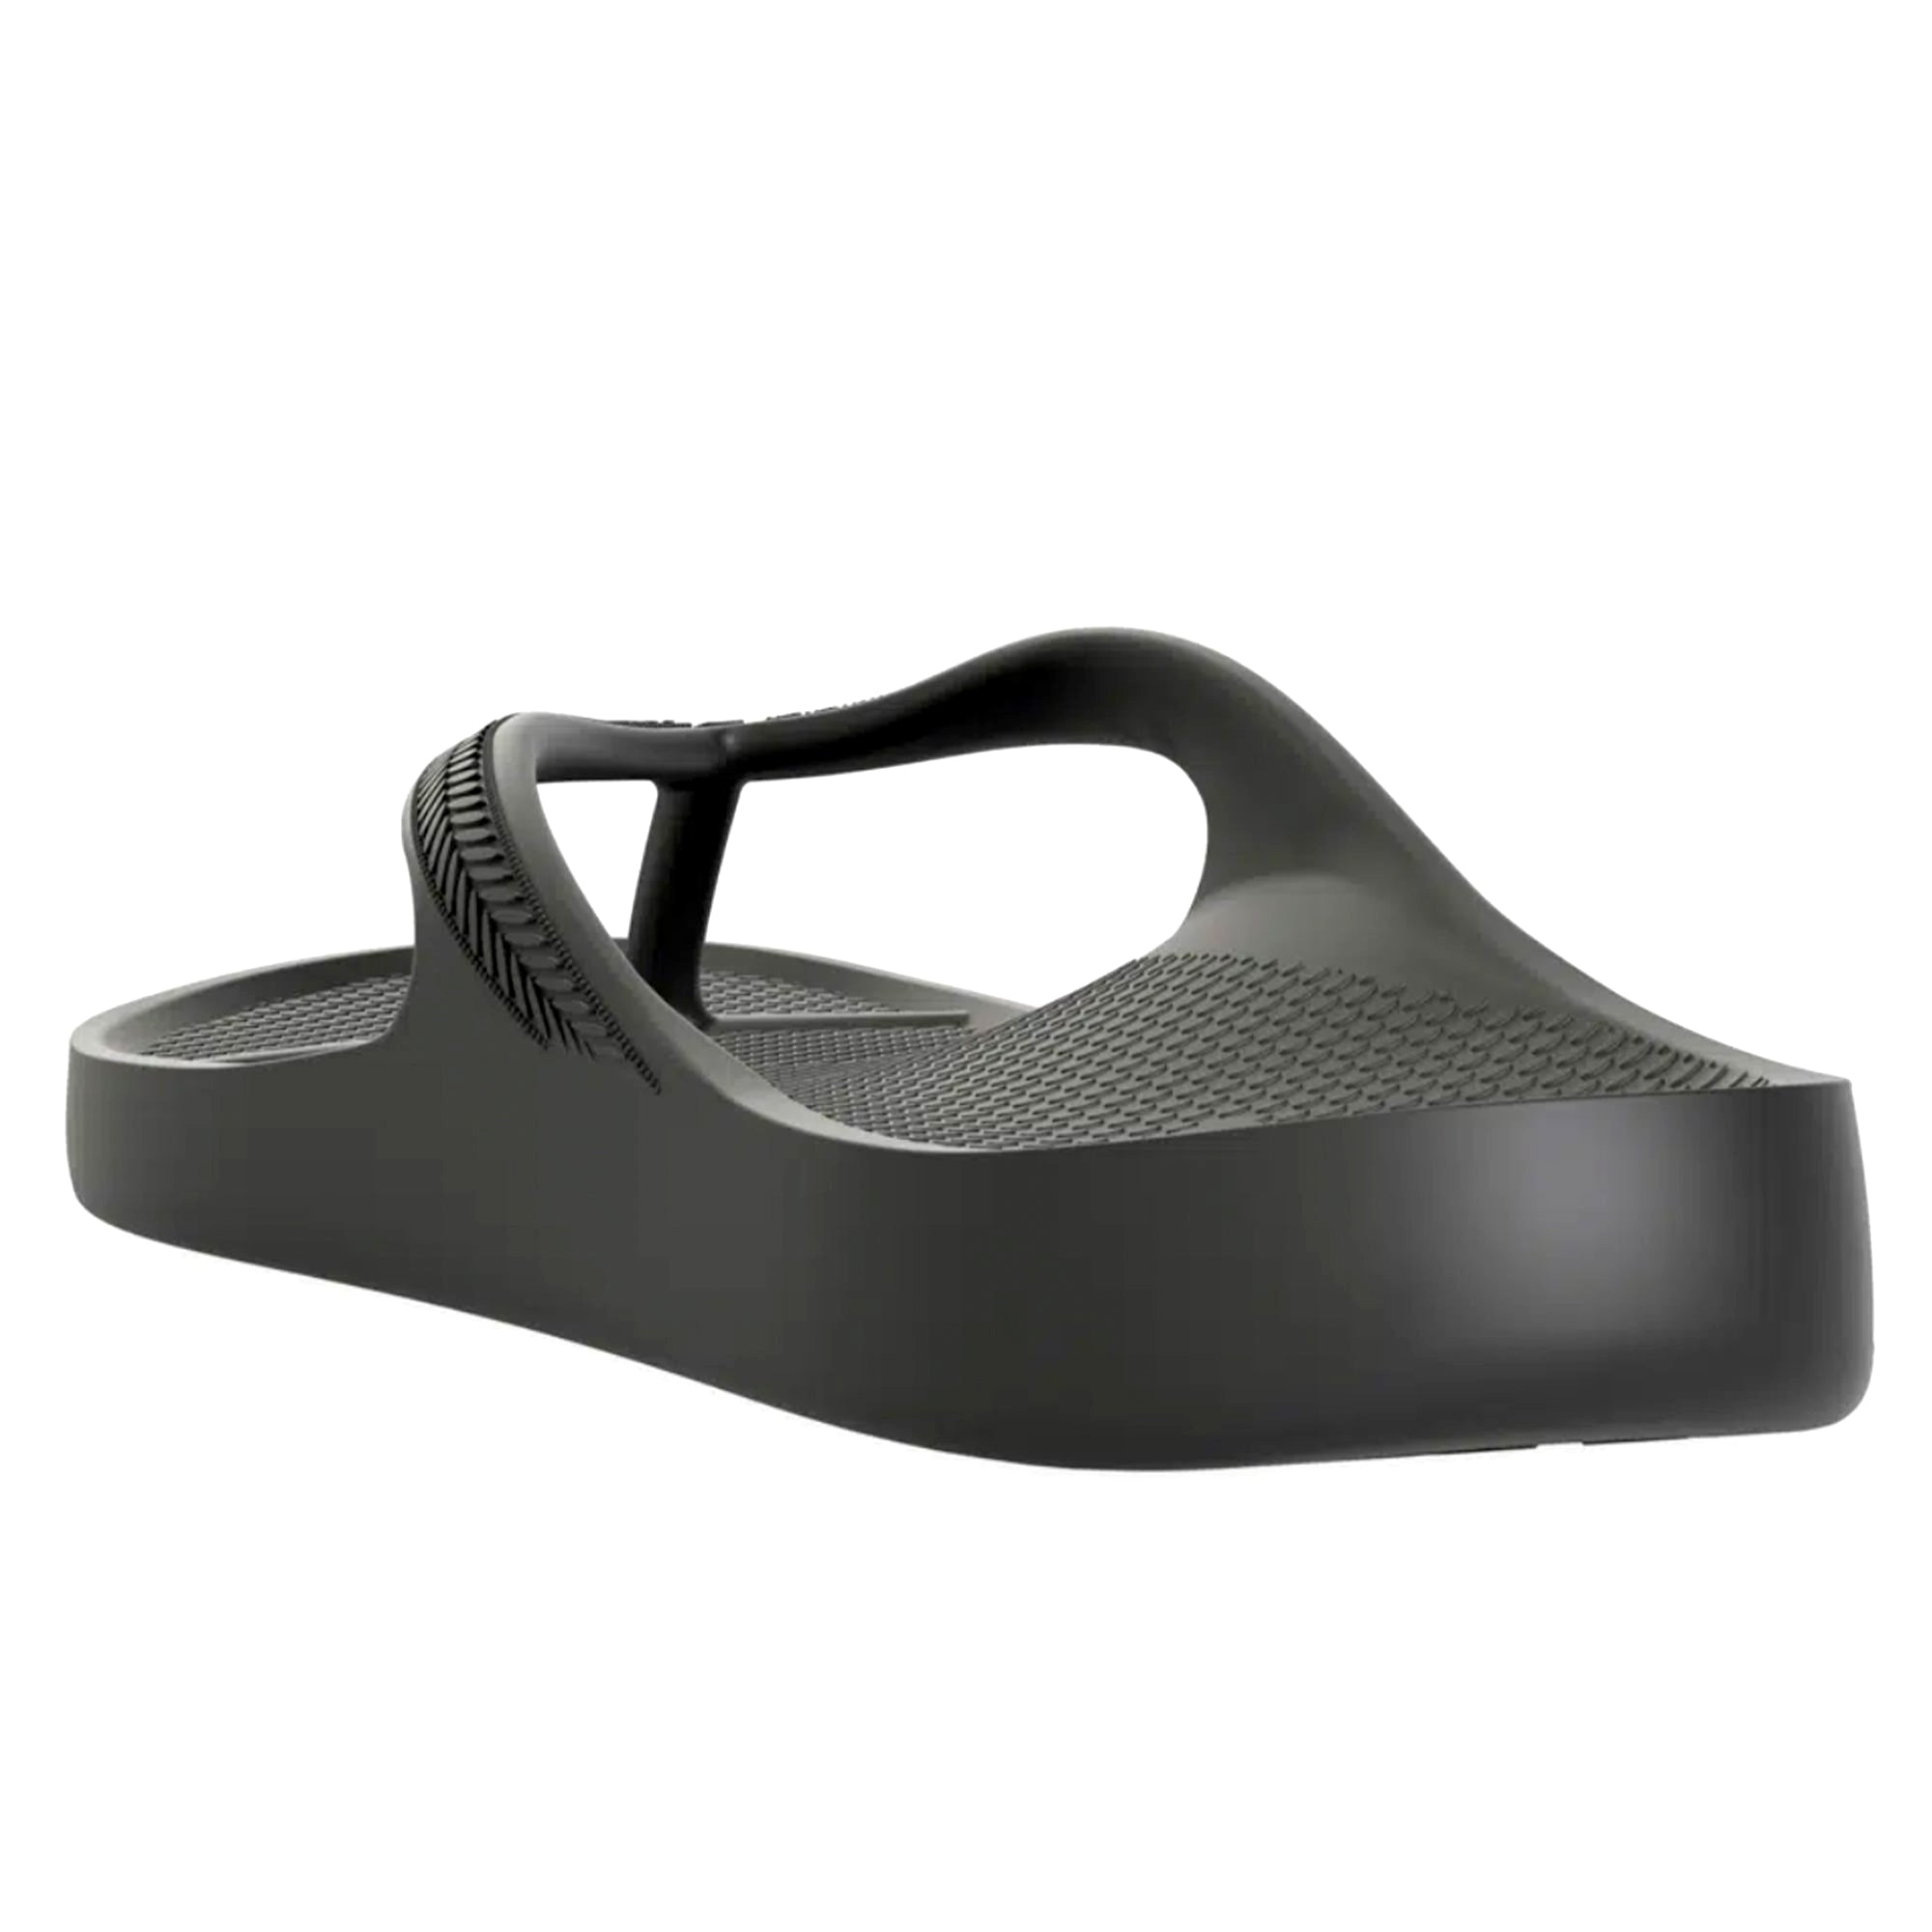 Arch Support Thongs